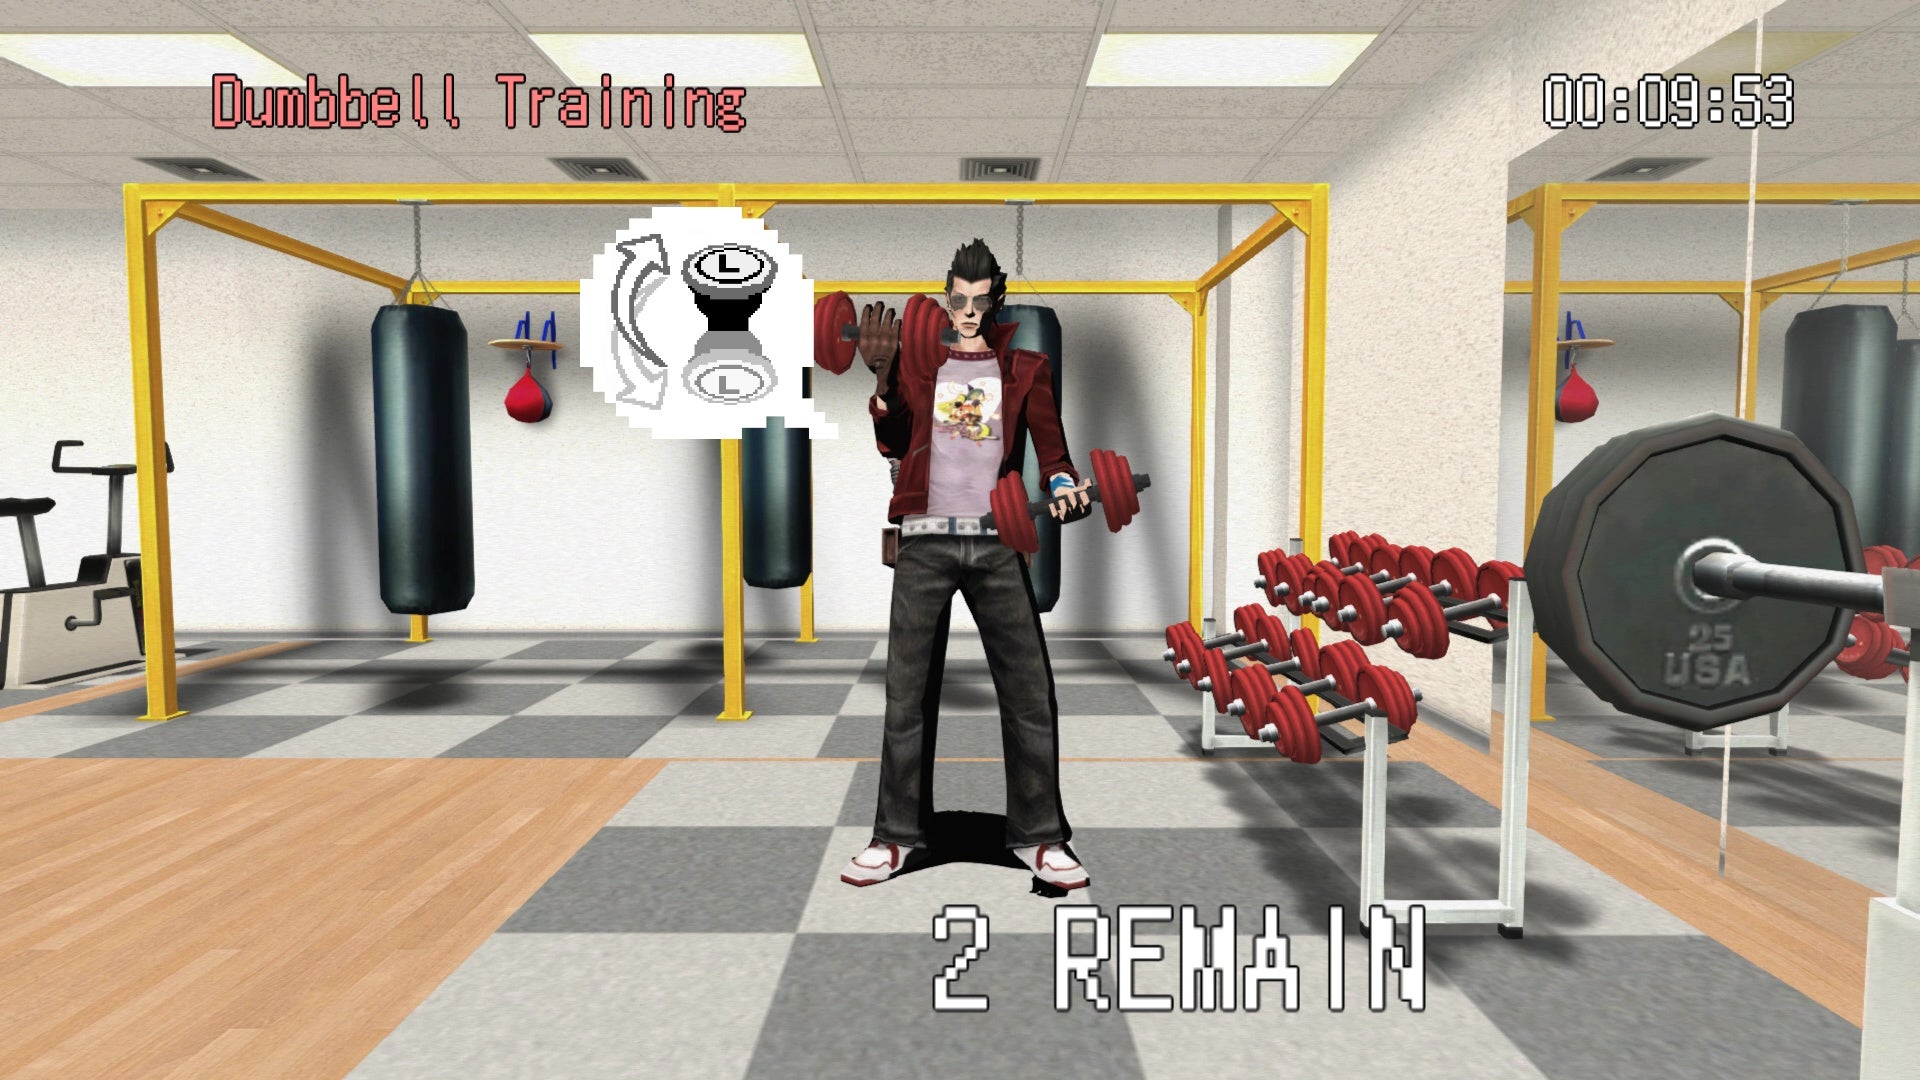 A screenshot from No More Heroes which shows Travis doing bicep curls in a gym to train his muscles.